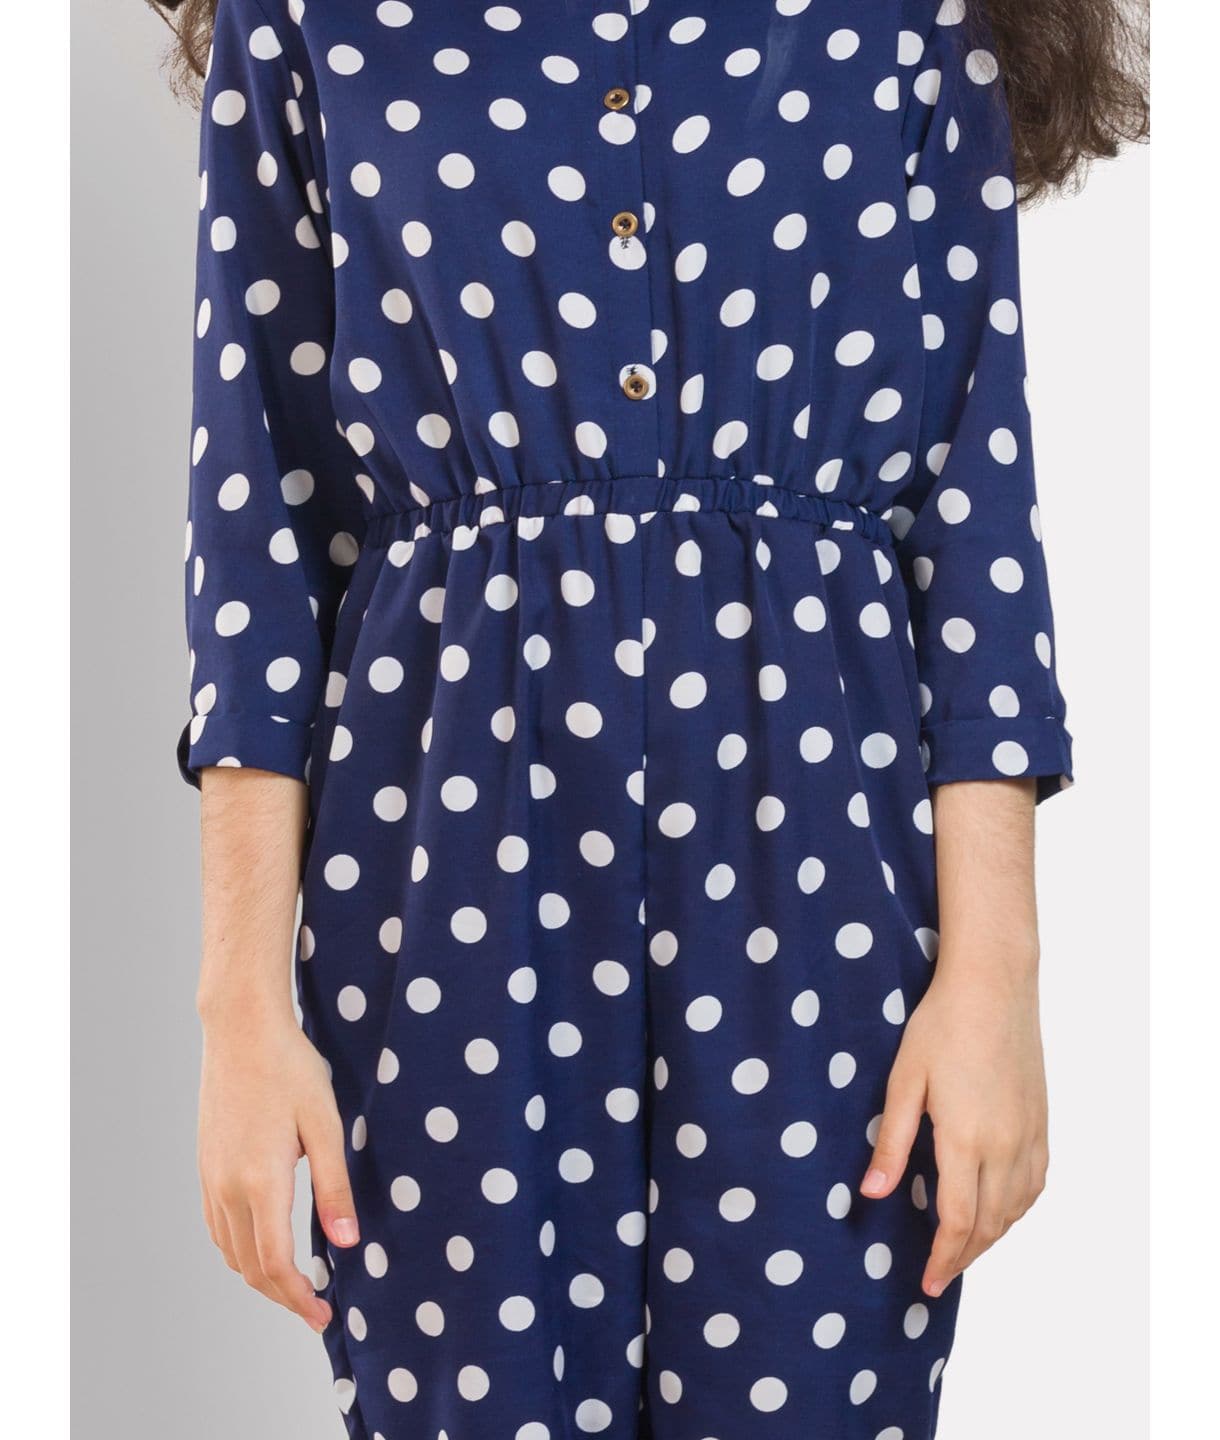 Polka Roll-up Jumpsuit for Girls - Uptownie